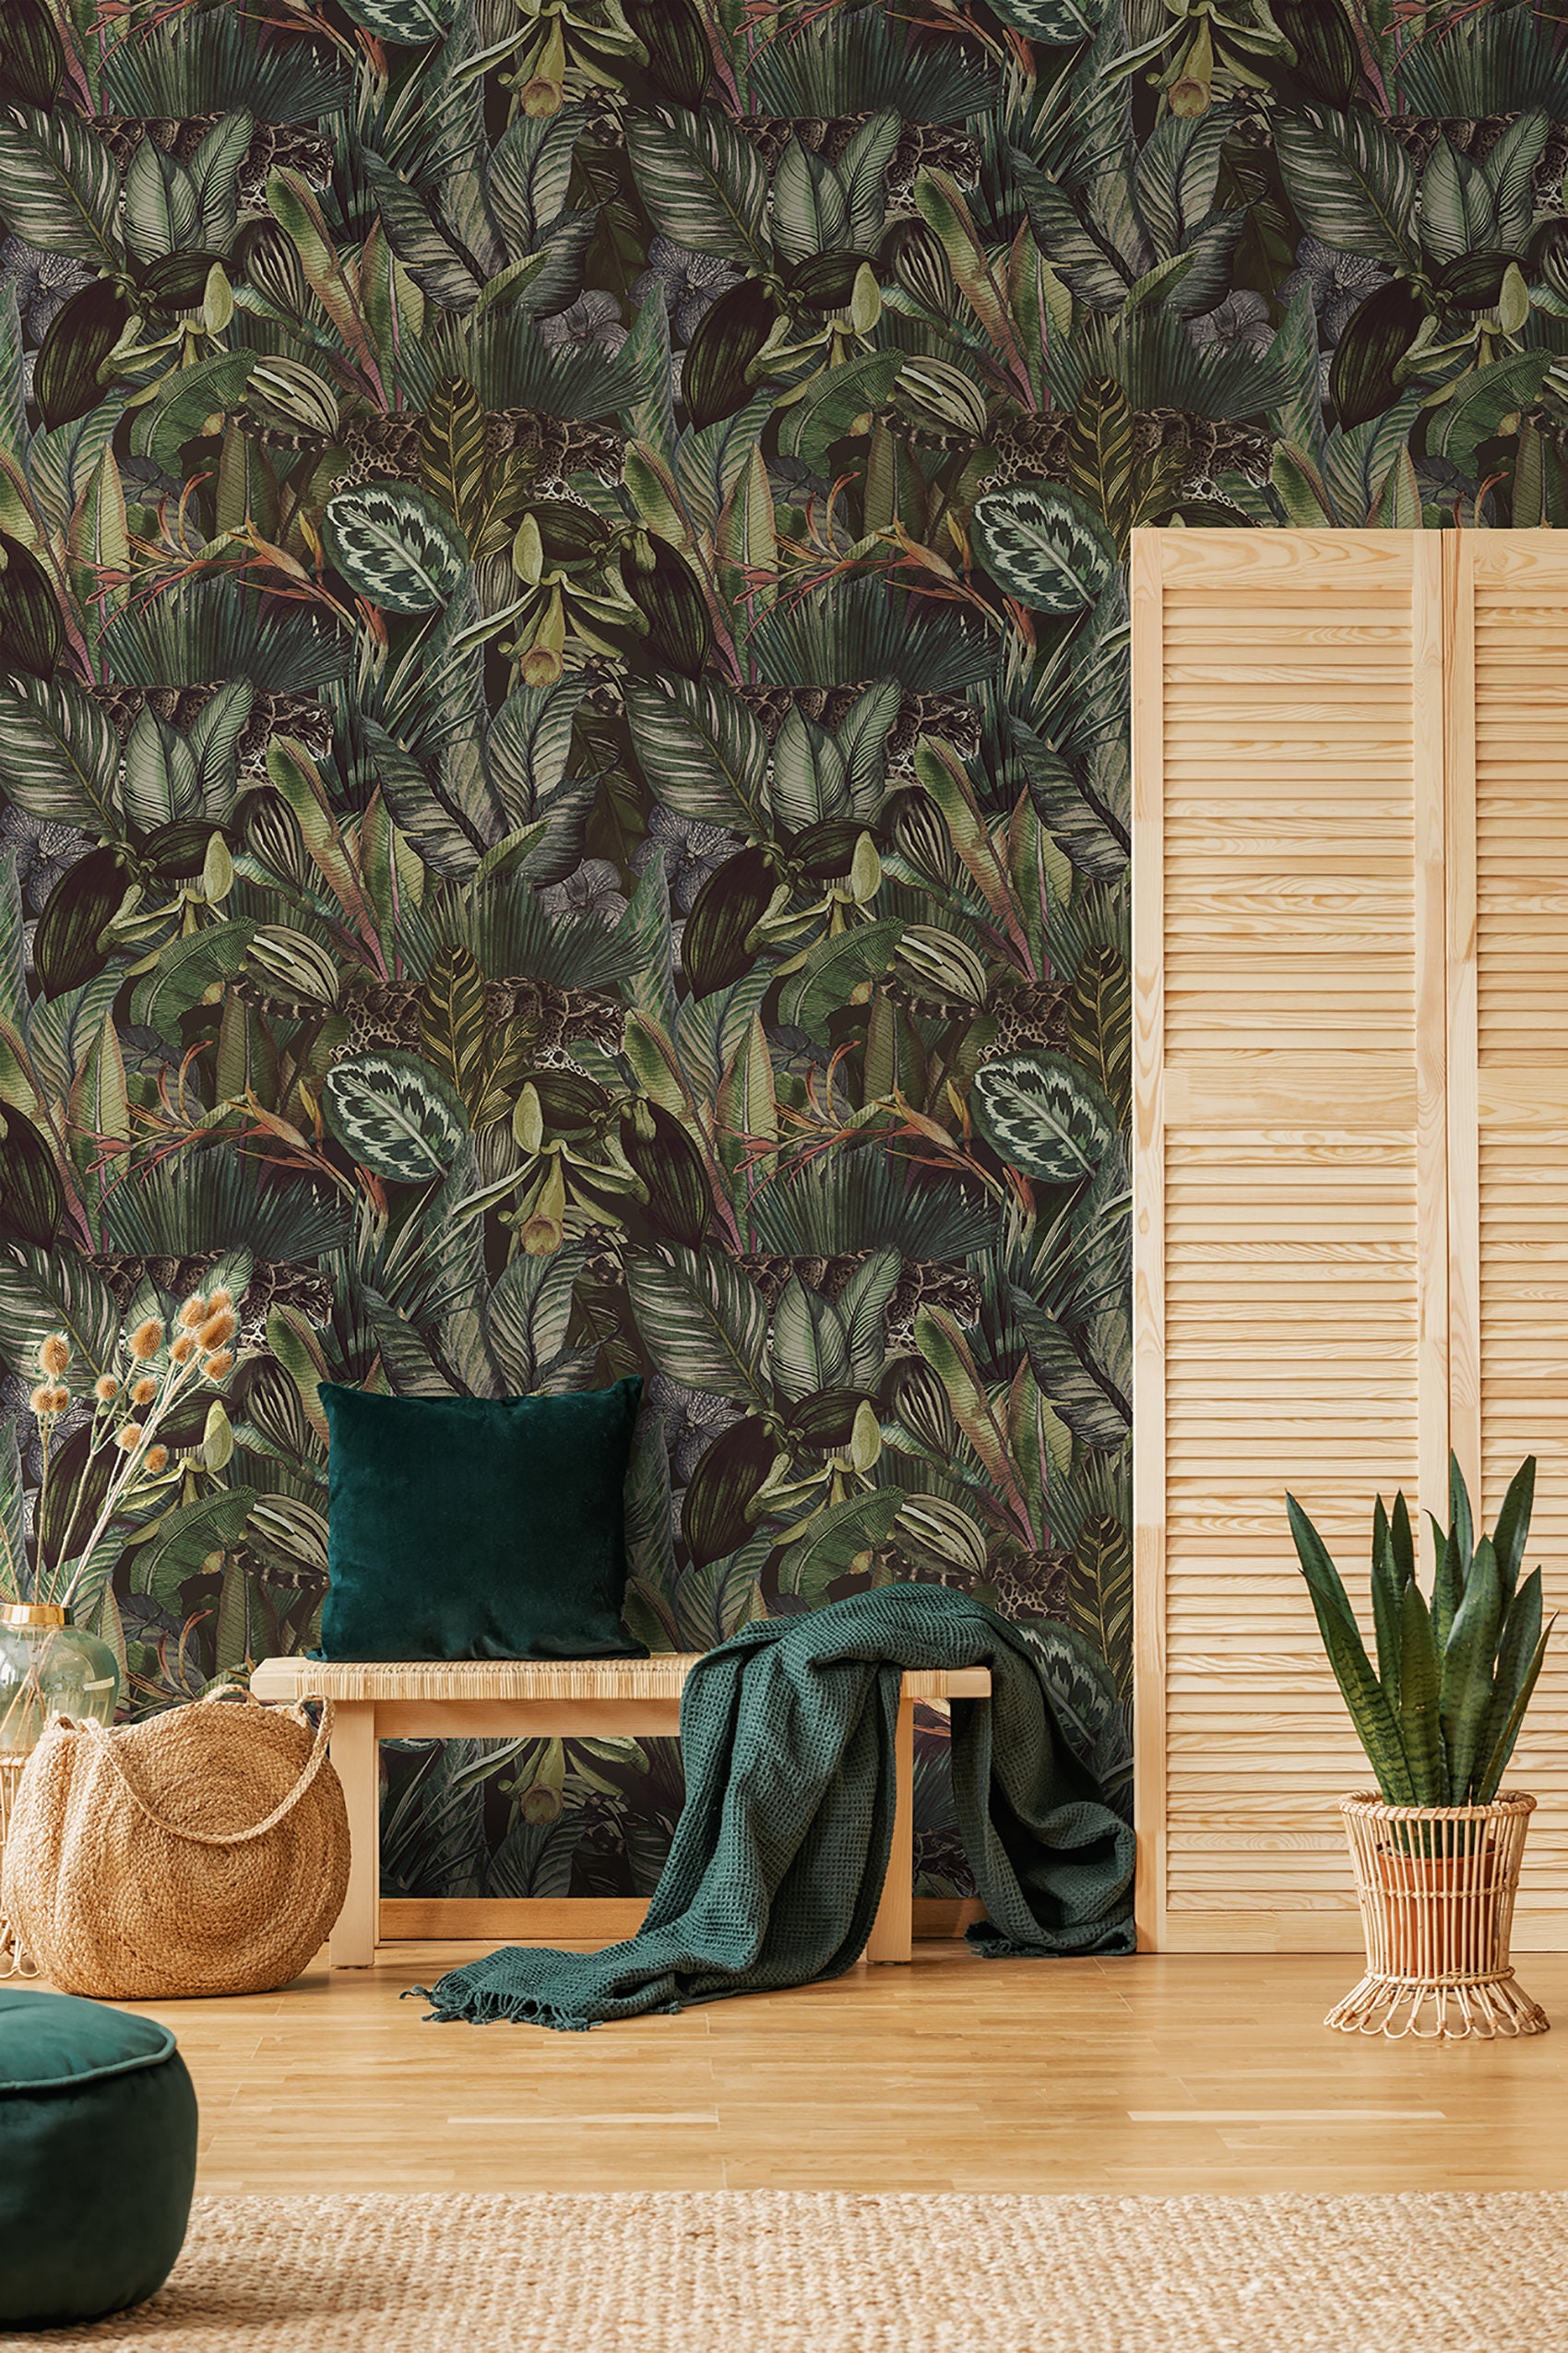 WESTICK Dark Tropical Wallpaper Vintage Palm Tree Wallpaper Peel and Stick  Banana Leaf Contact Paper Decorative Jungle Plant Wall Paper Removable  Black Palm Wallpapers for Bathroom Closet 1775x118 in   Amazoncom